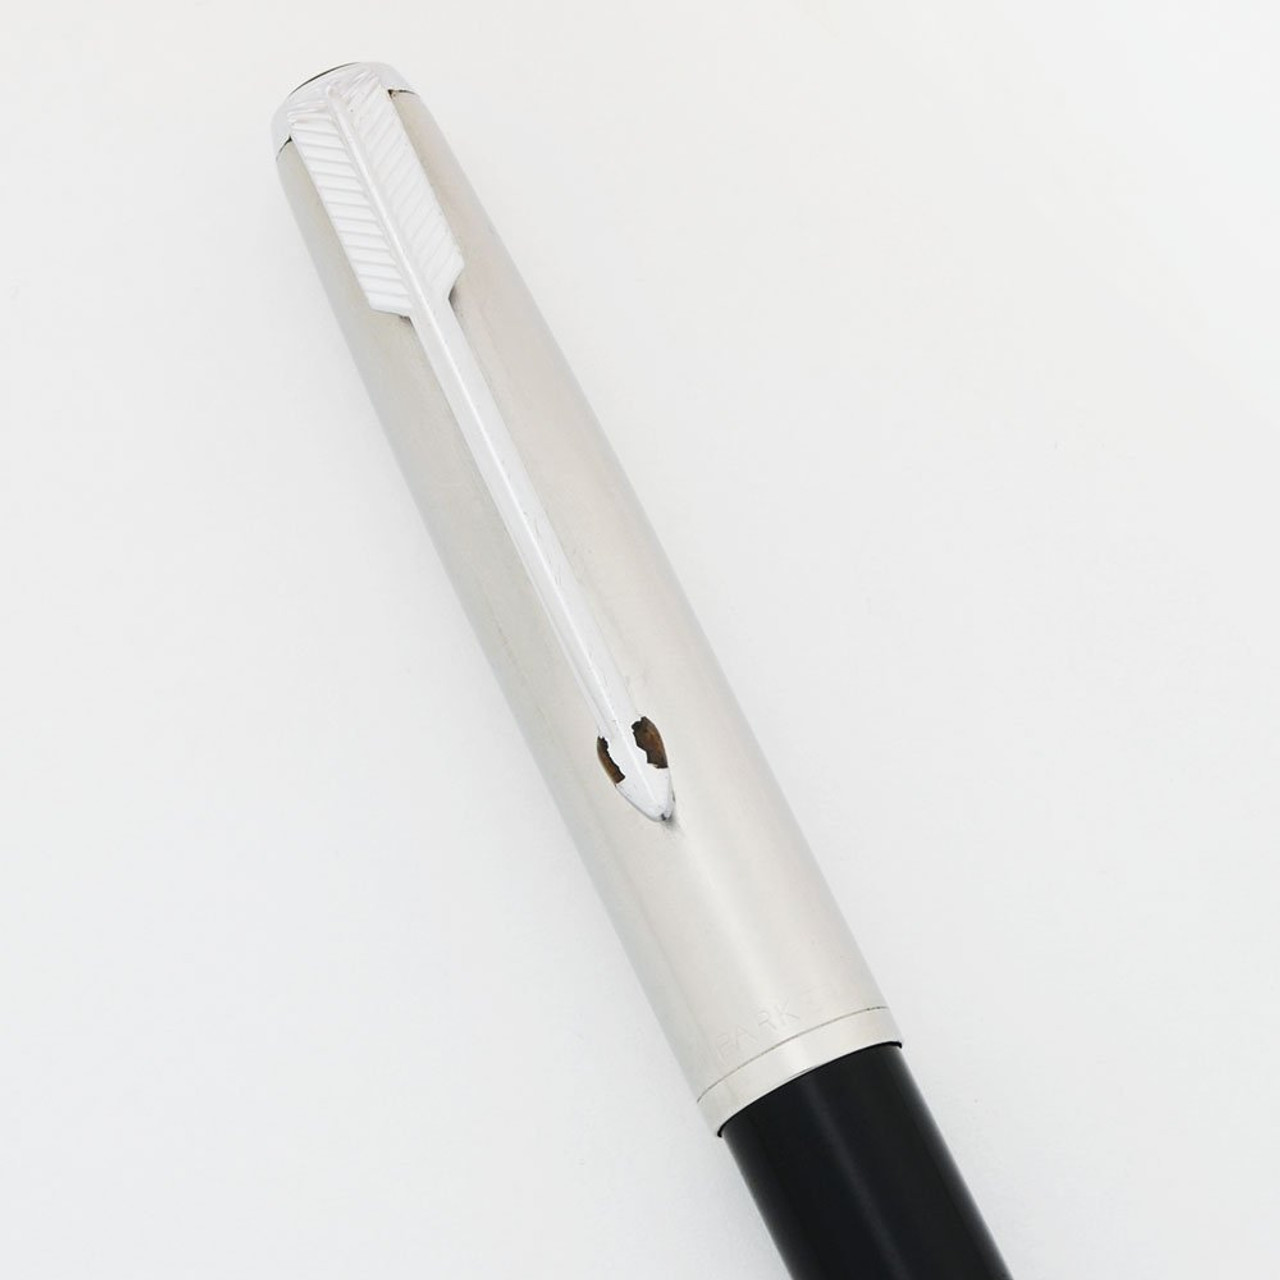 Parker 51 Mechanical Pencil (1950) - Repeater, Black, Steel Cap, 0.9mm Leads  (Very Nice, Works Well)